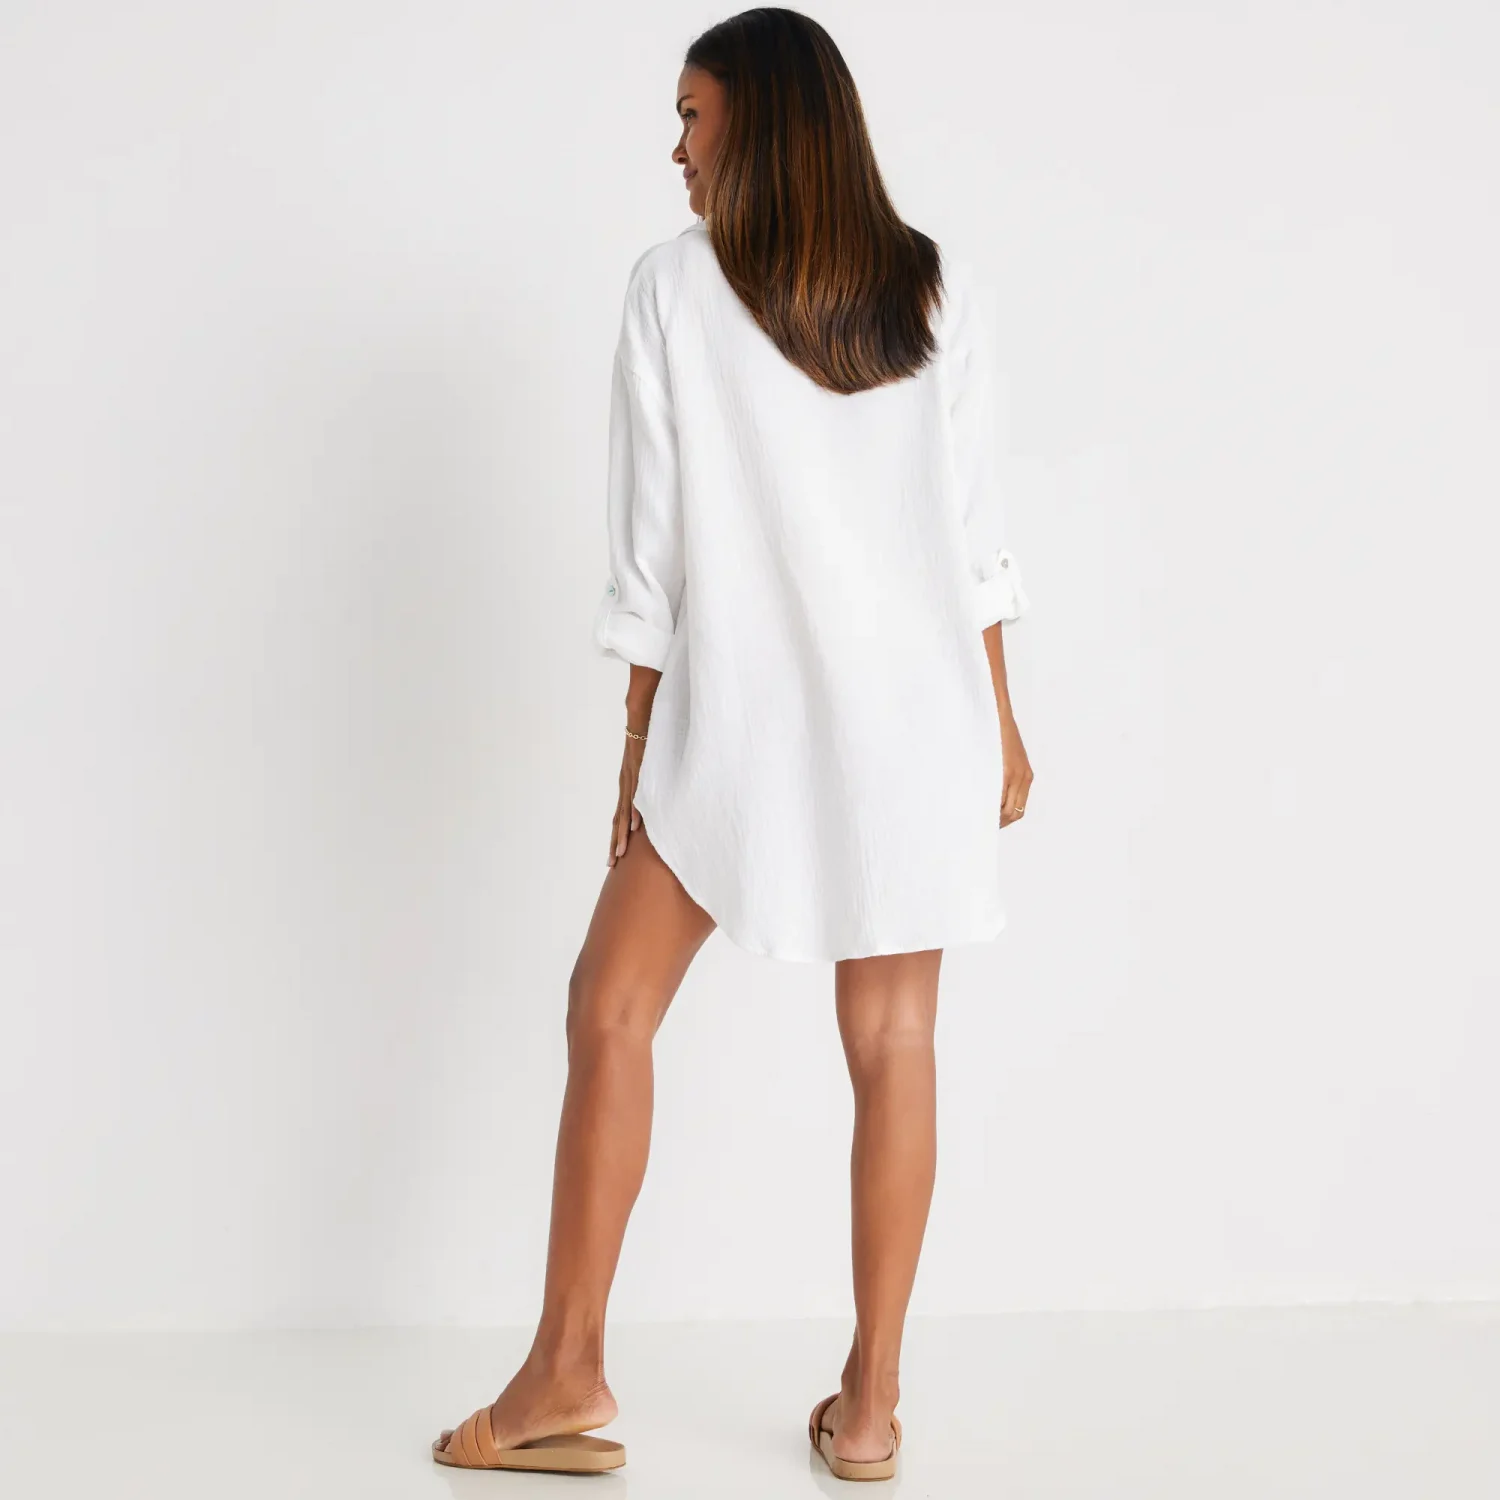 Golden Sun brand contemporary and stylish maternity friendly white shirt dress cover ups